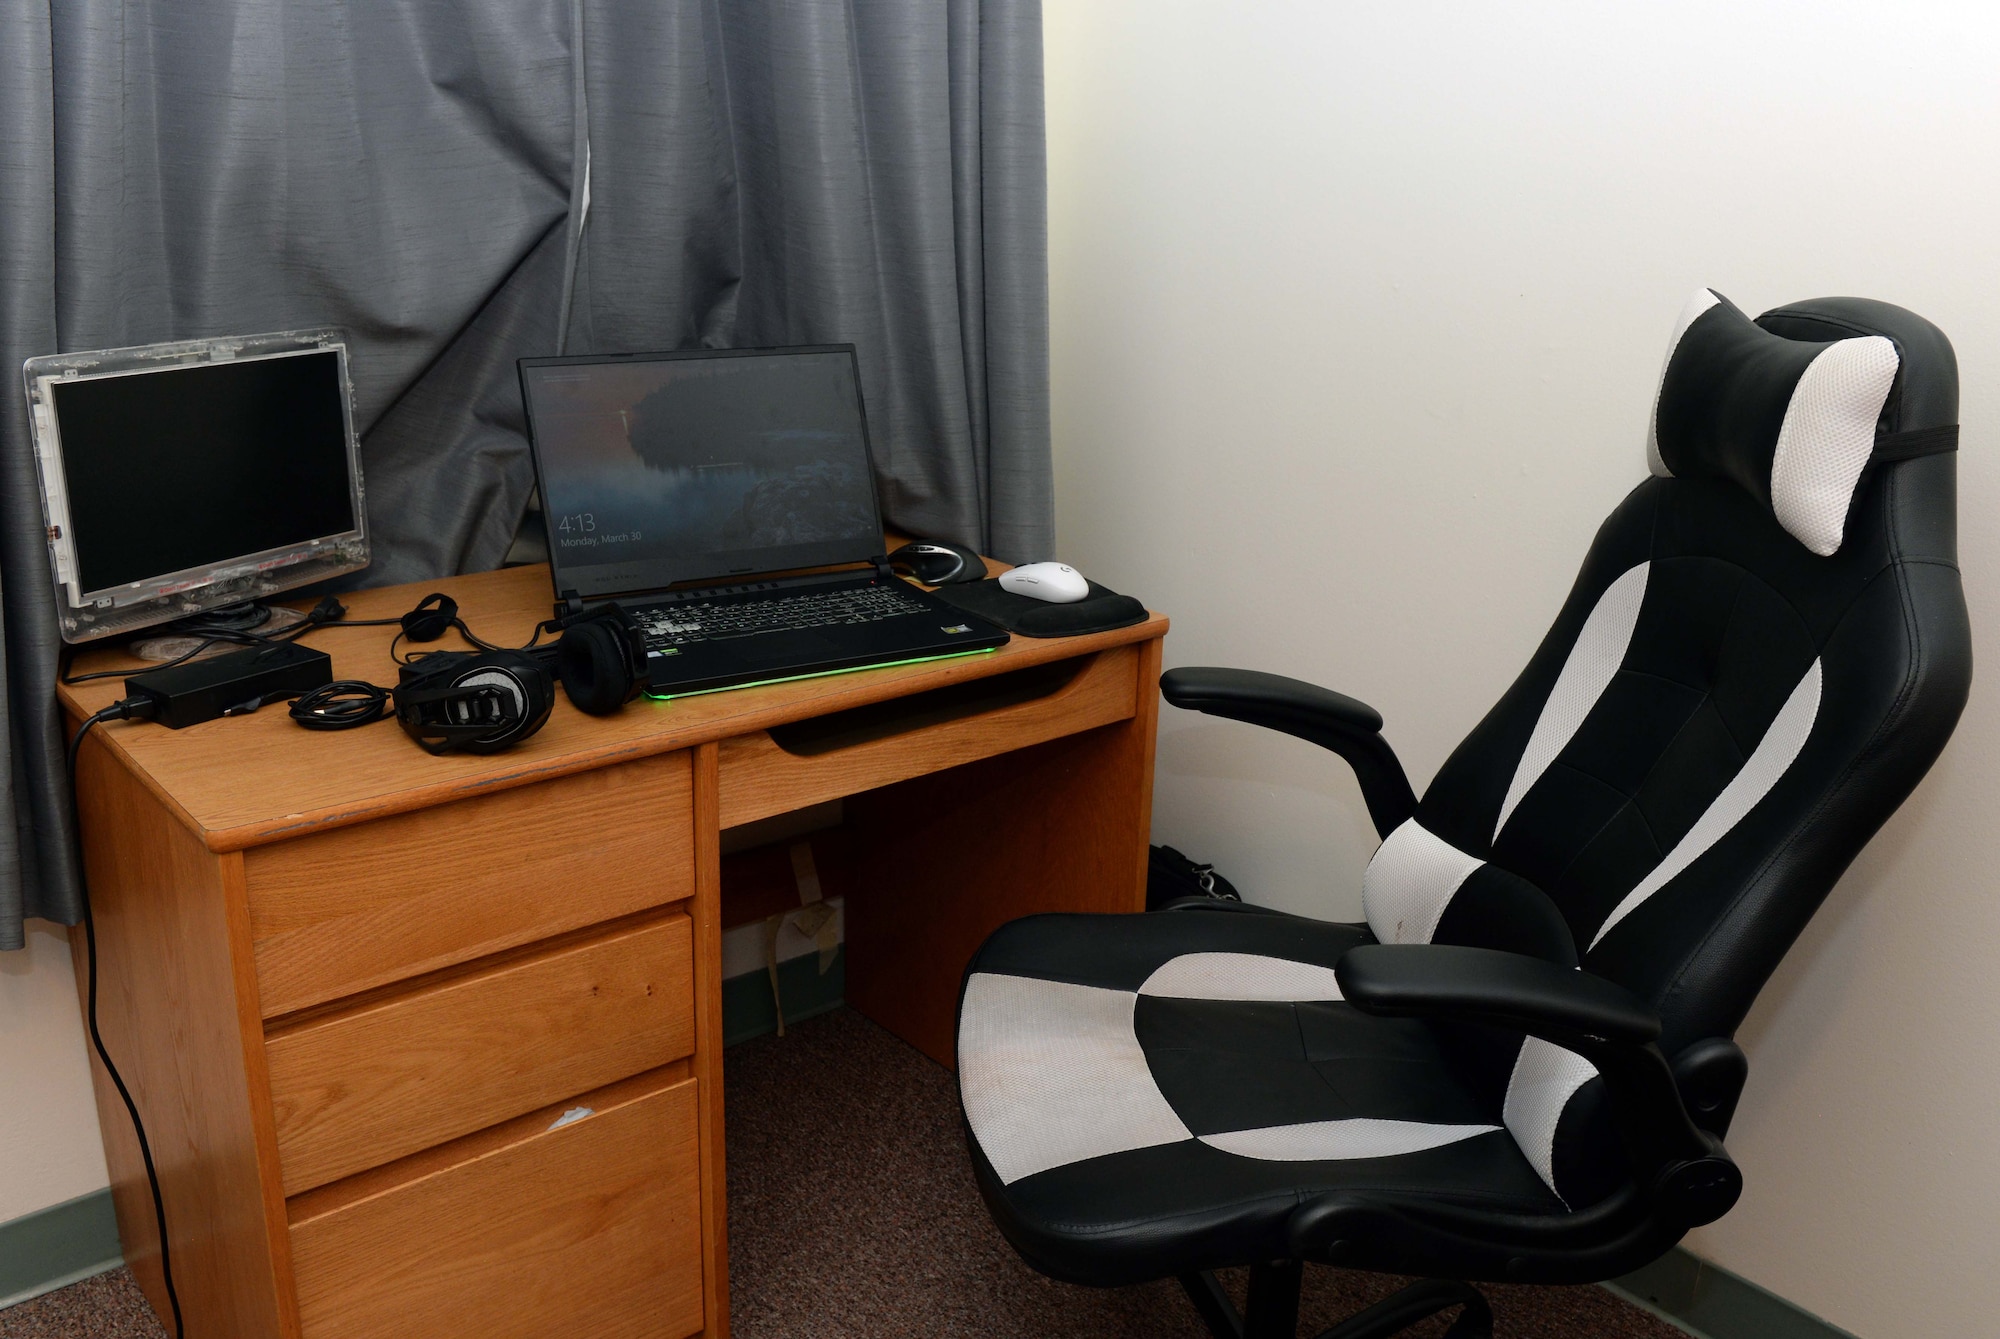 Airman's Video gaming set up with gaming chair